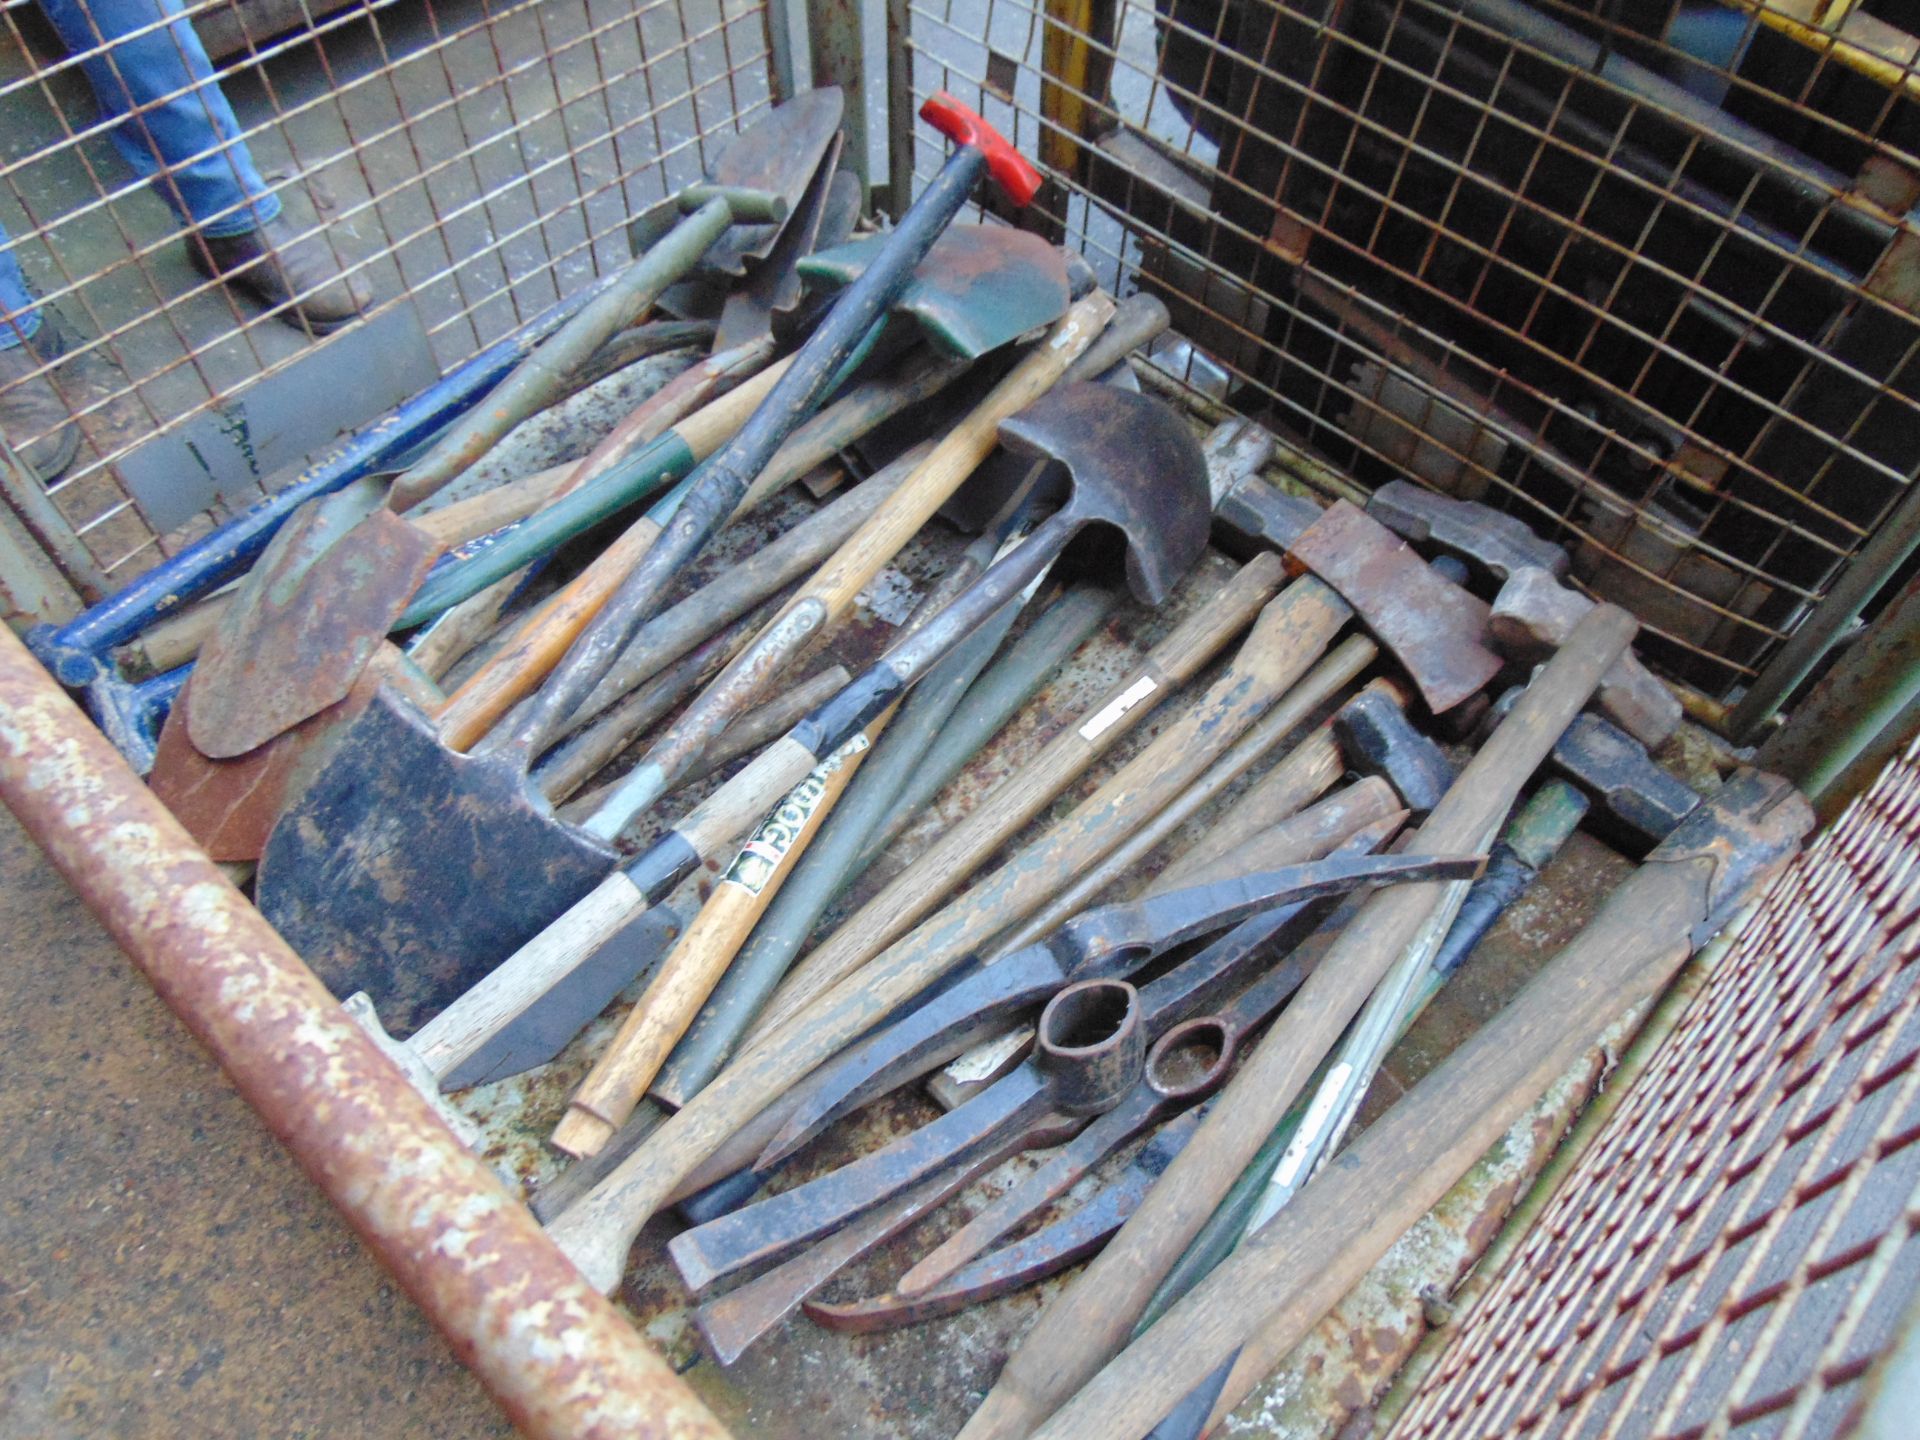 1 x Stillage 30+ British Army Pioneer Picks, Shovels, Axes and Sledge Hammers - Image 4 of 5